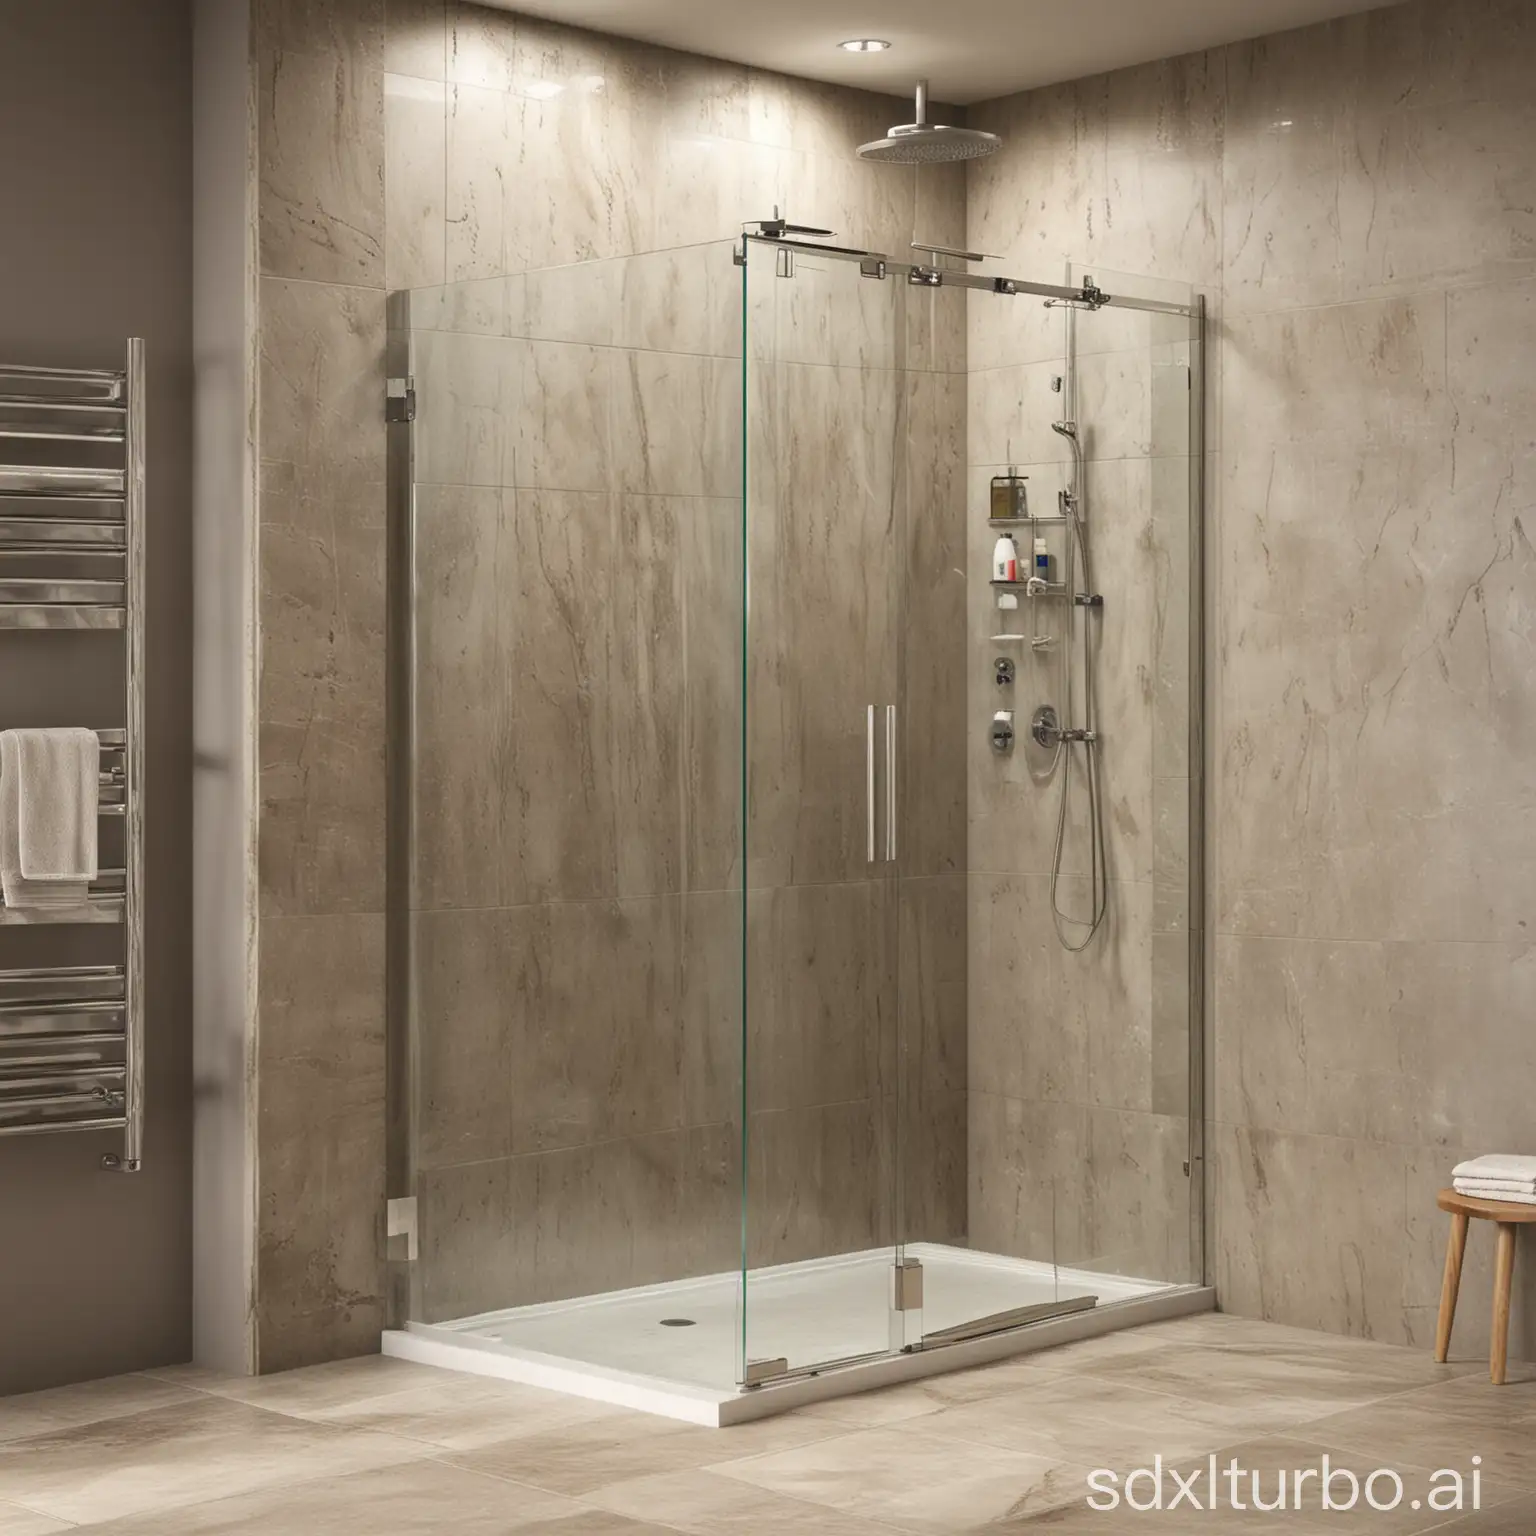 Create an image of glass shower enclosure with an adult opening the door